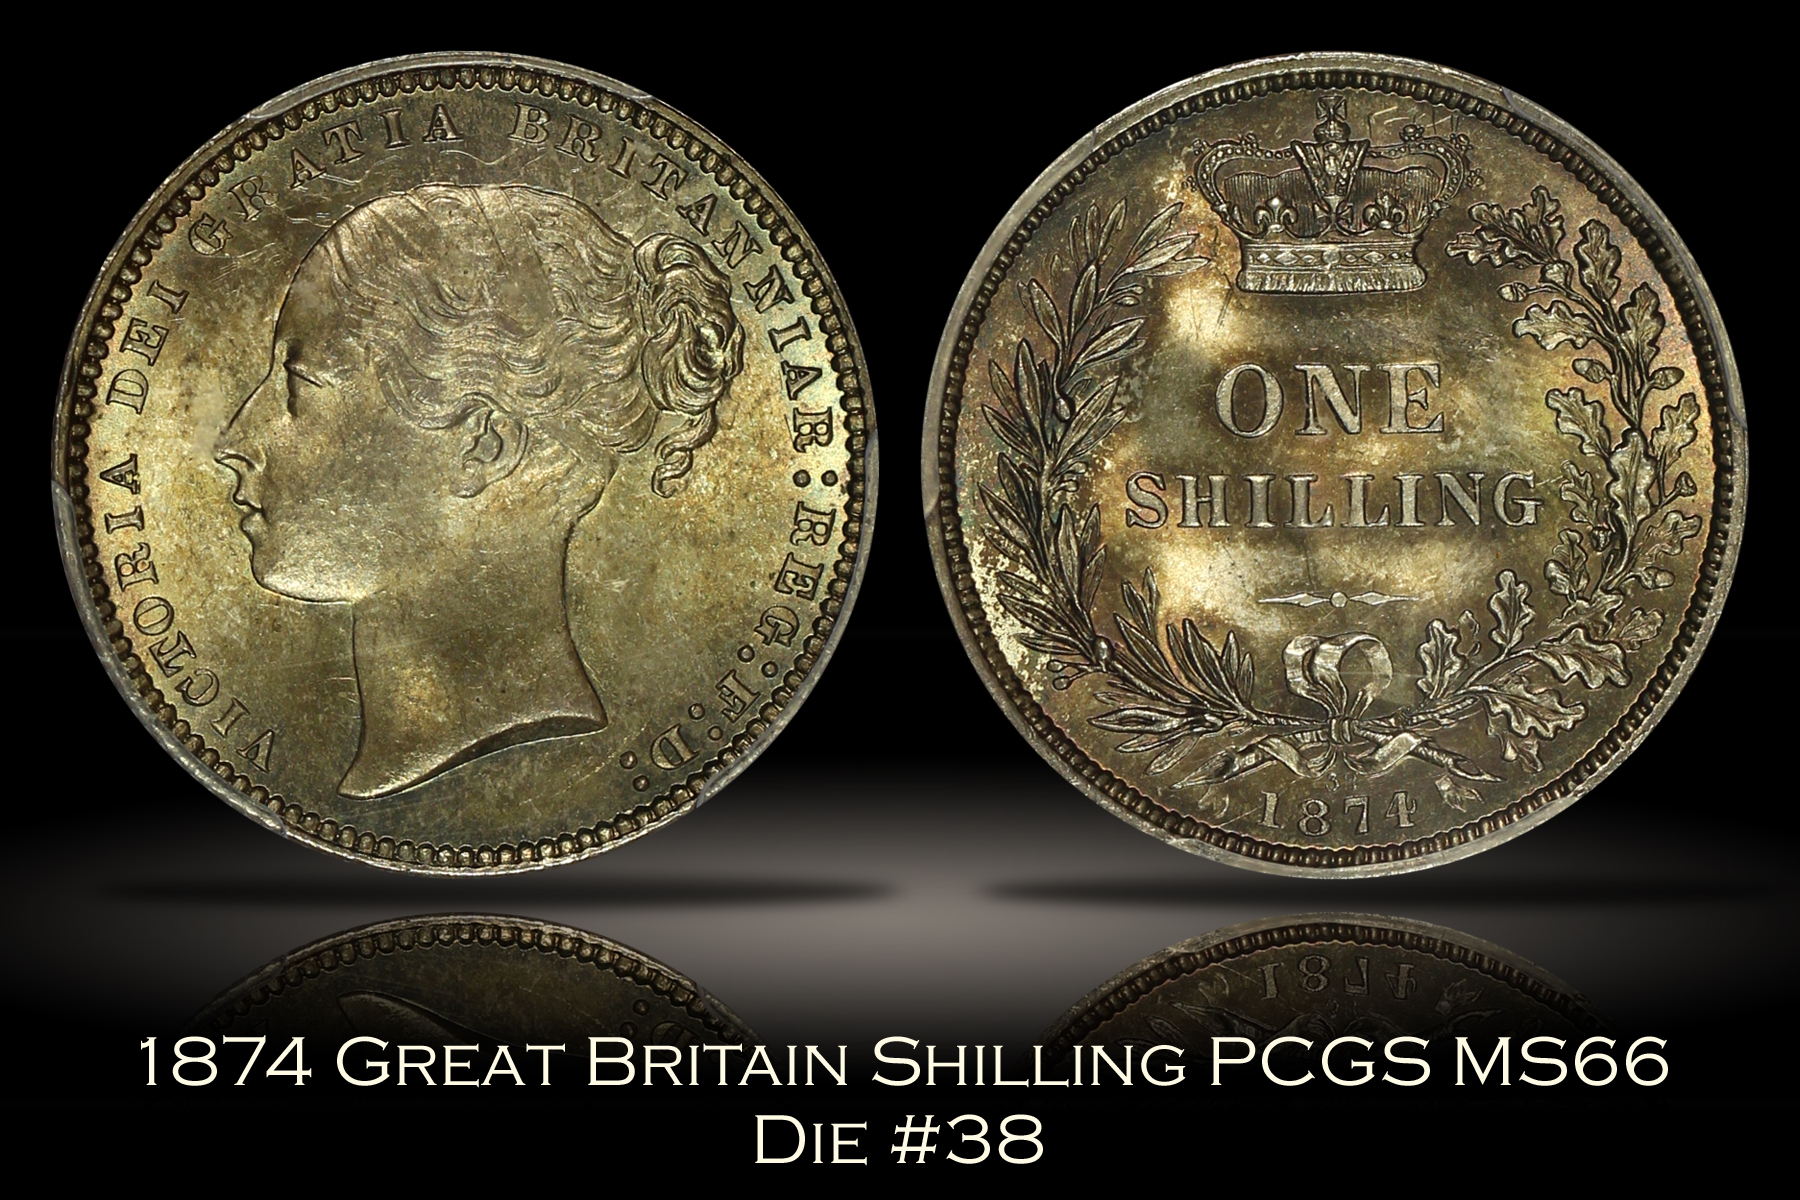 1874 Great Britain Shilling Die #38 PCGS MS66